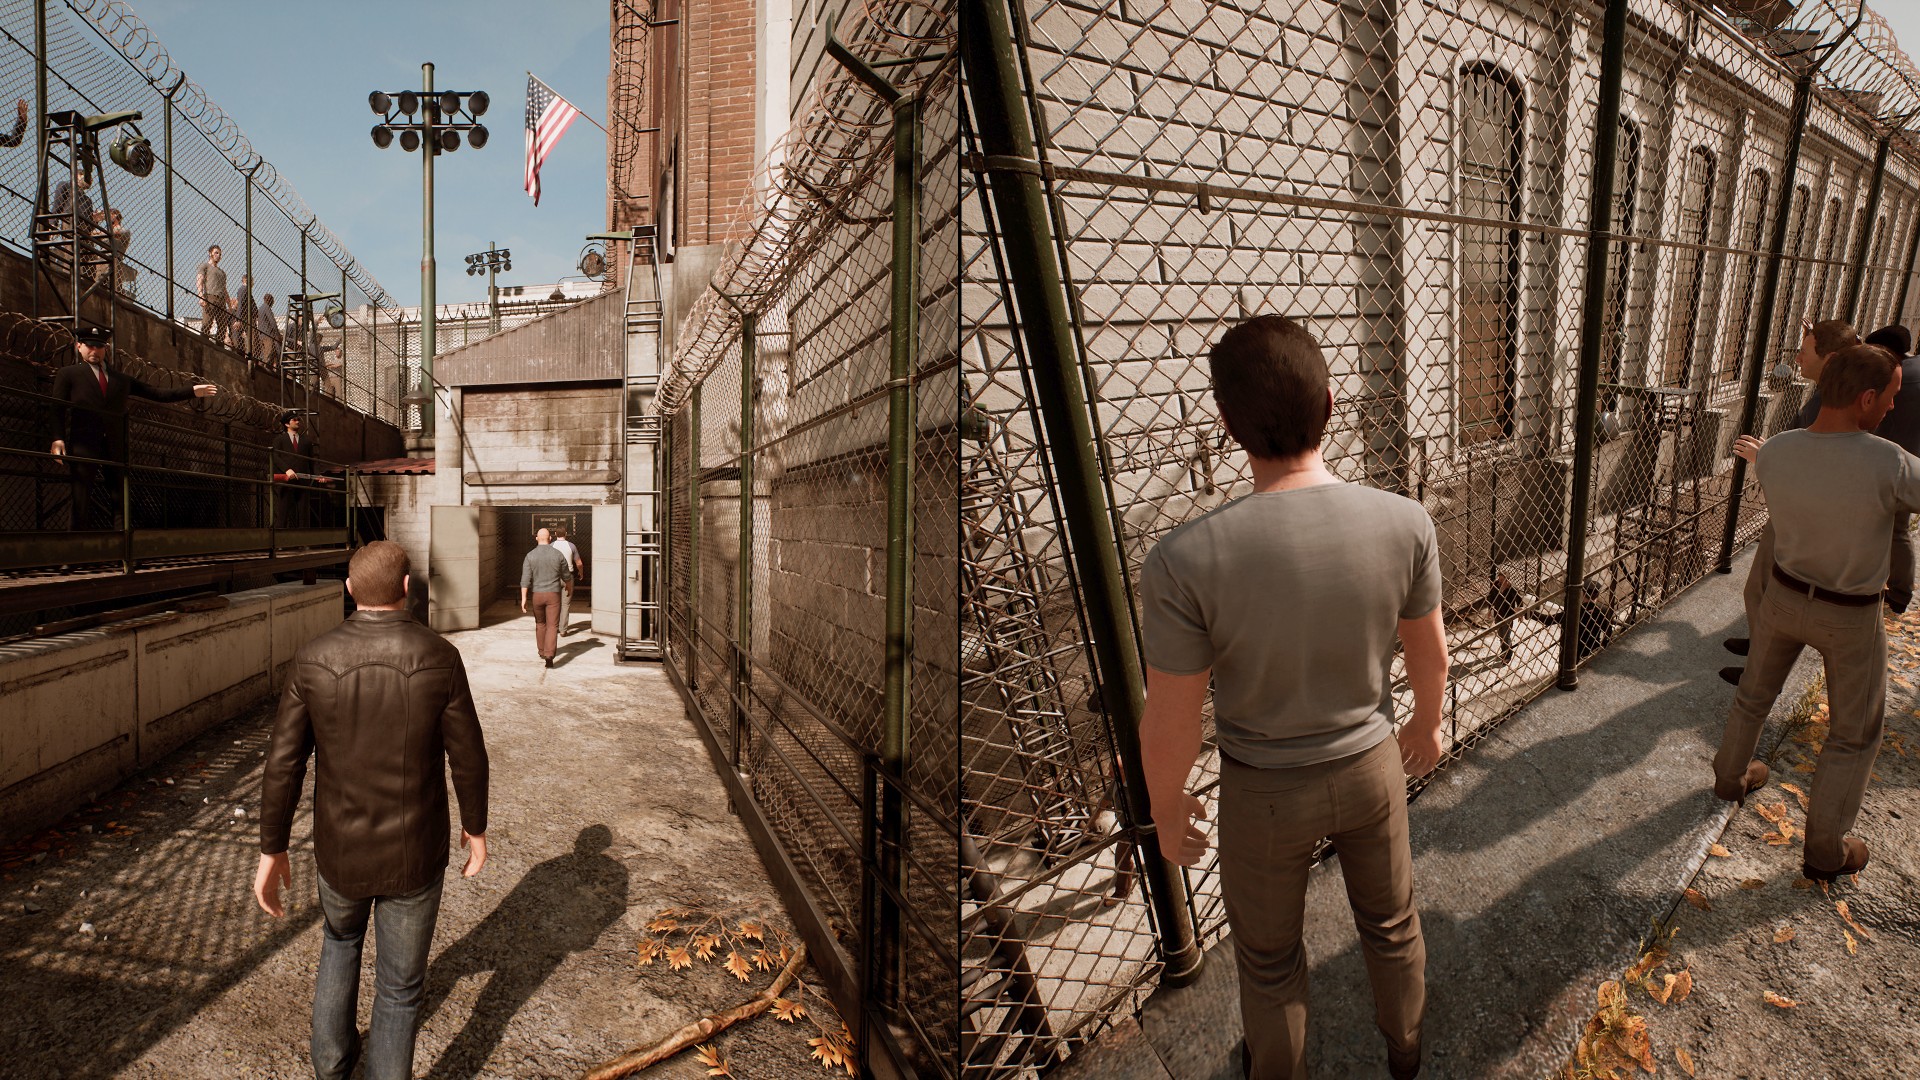 a way out xbox one x